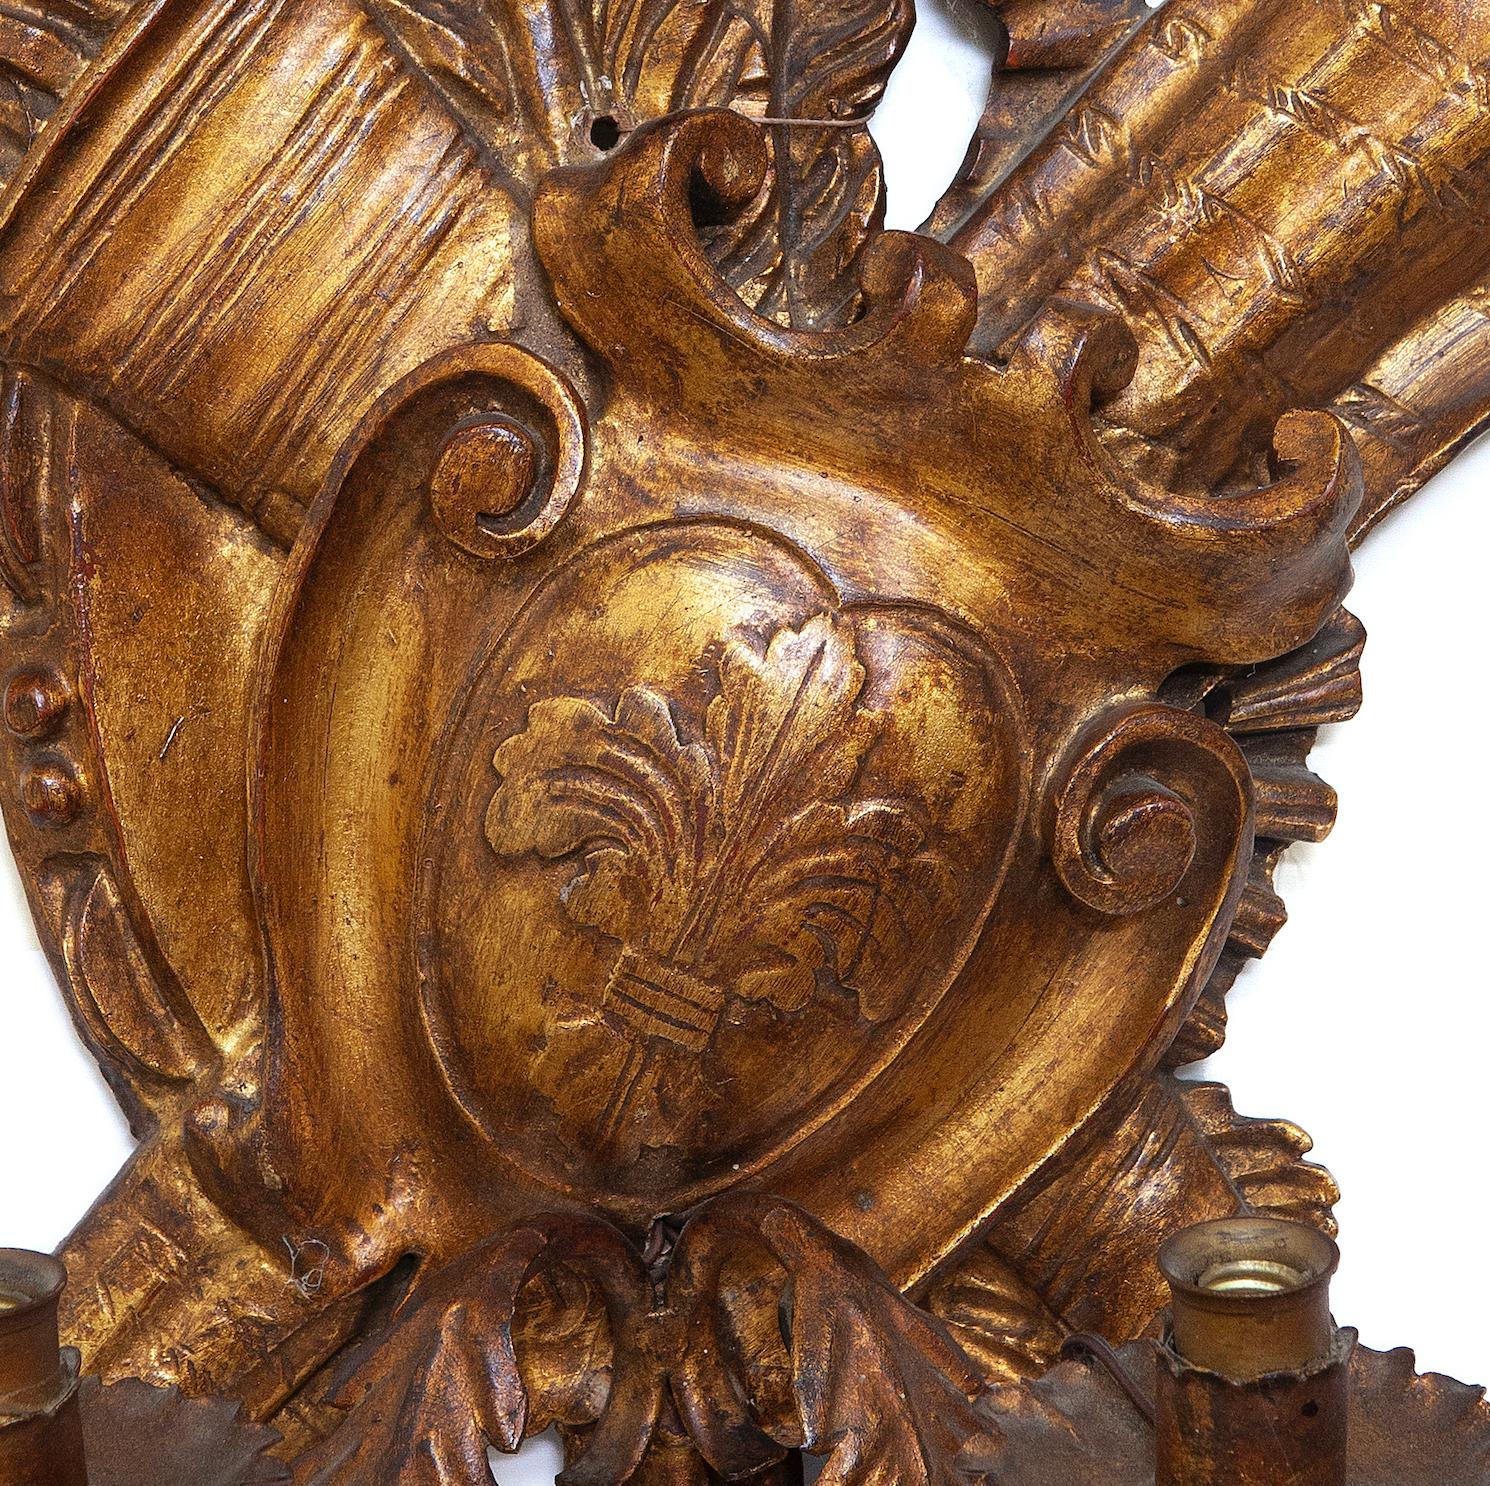 English Wall Sconce Trophy Carved Gilded 19C Fleur-de-Lys Shield Quivers Herald 17.5